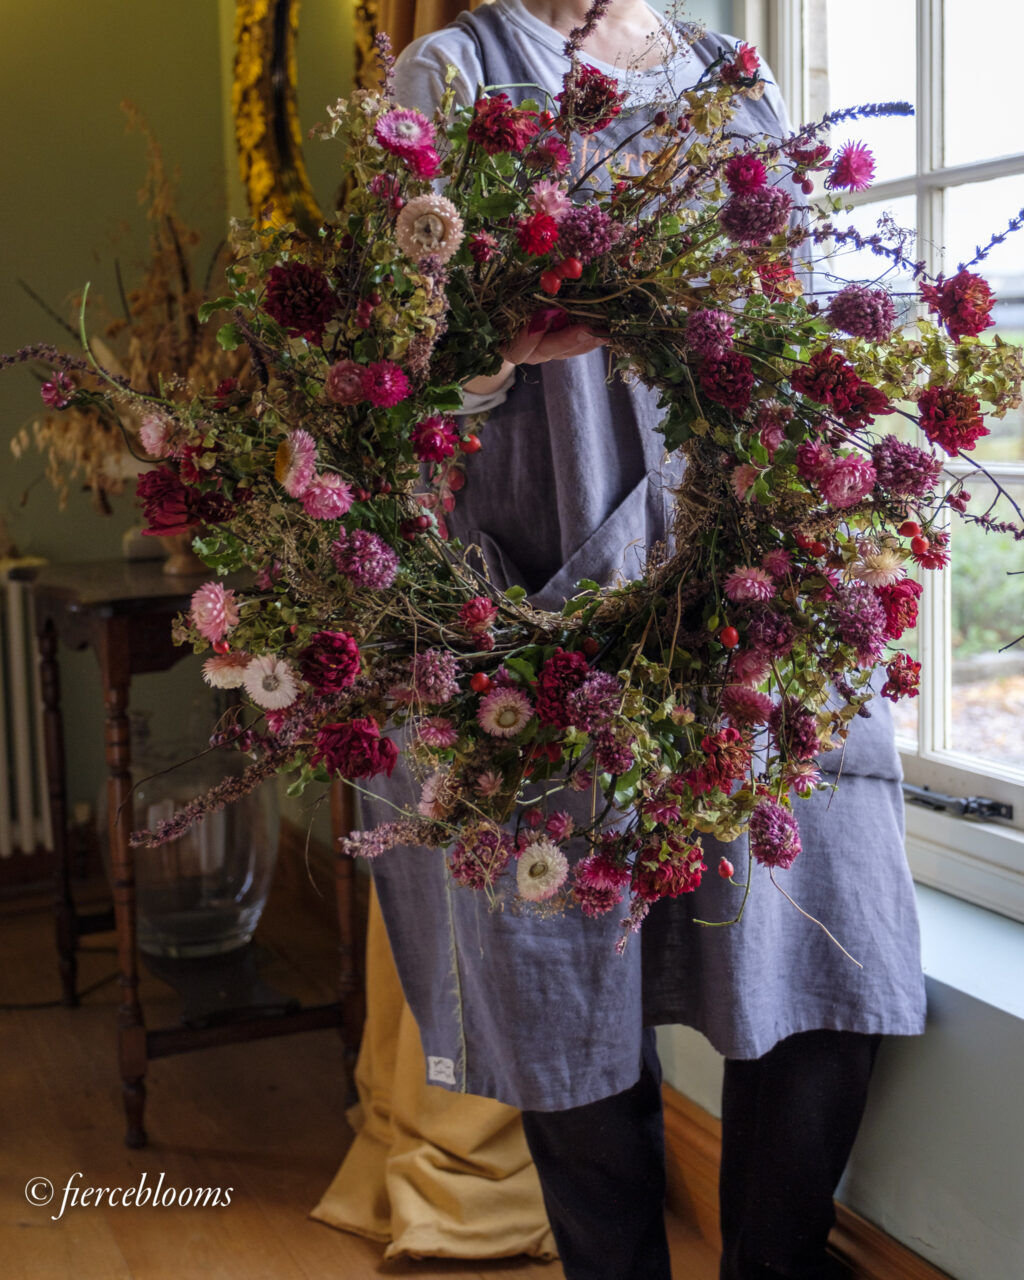 A wreath brimming with sustainable flowers, grown with the seasons using chemical free methods. Pink helichrysum do cartwheels in this glorious wild creation by Fierceblooms, Cheshire.